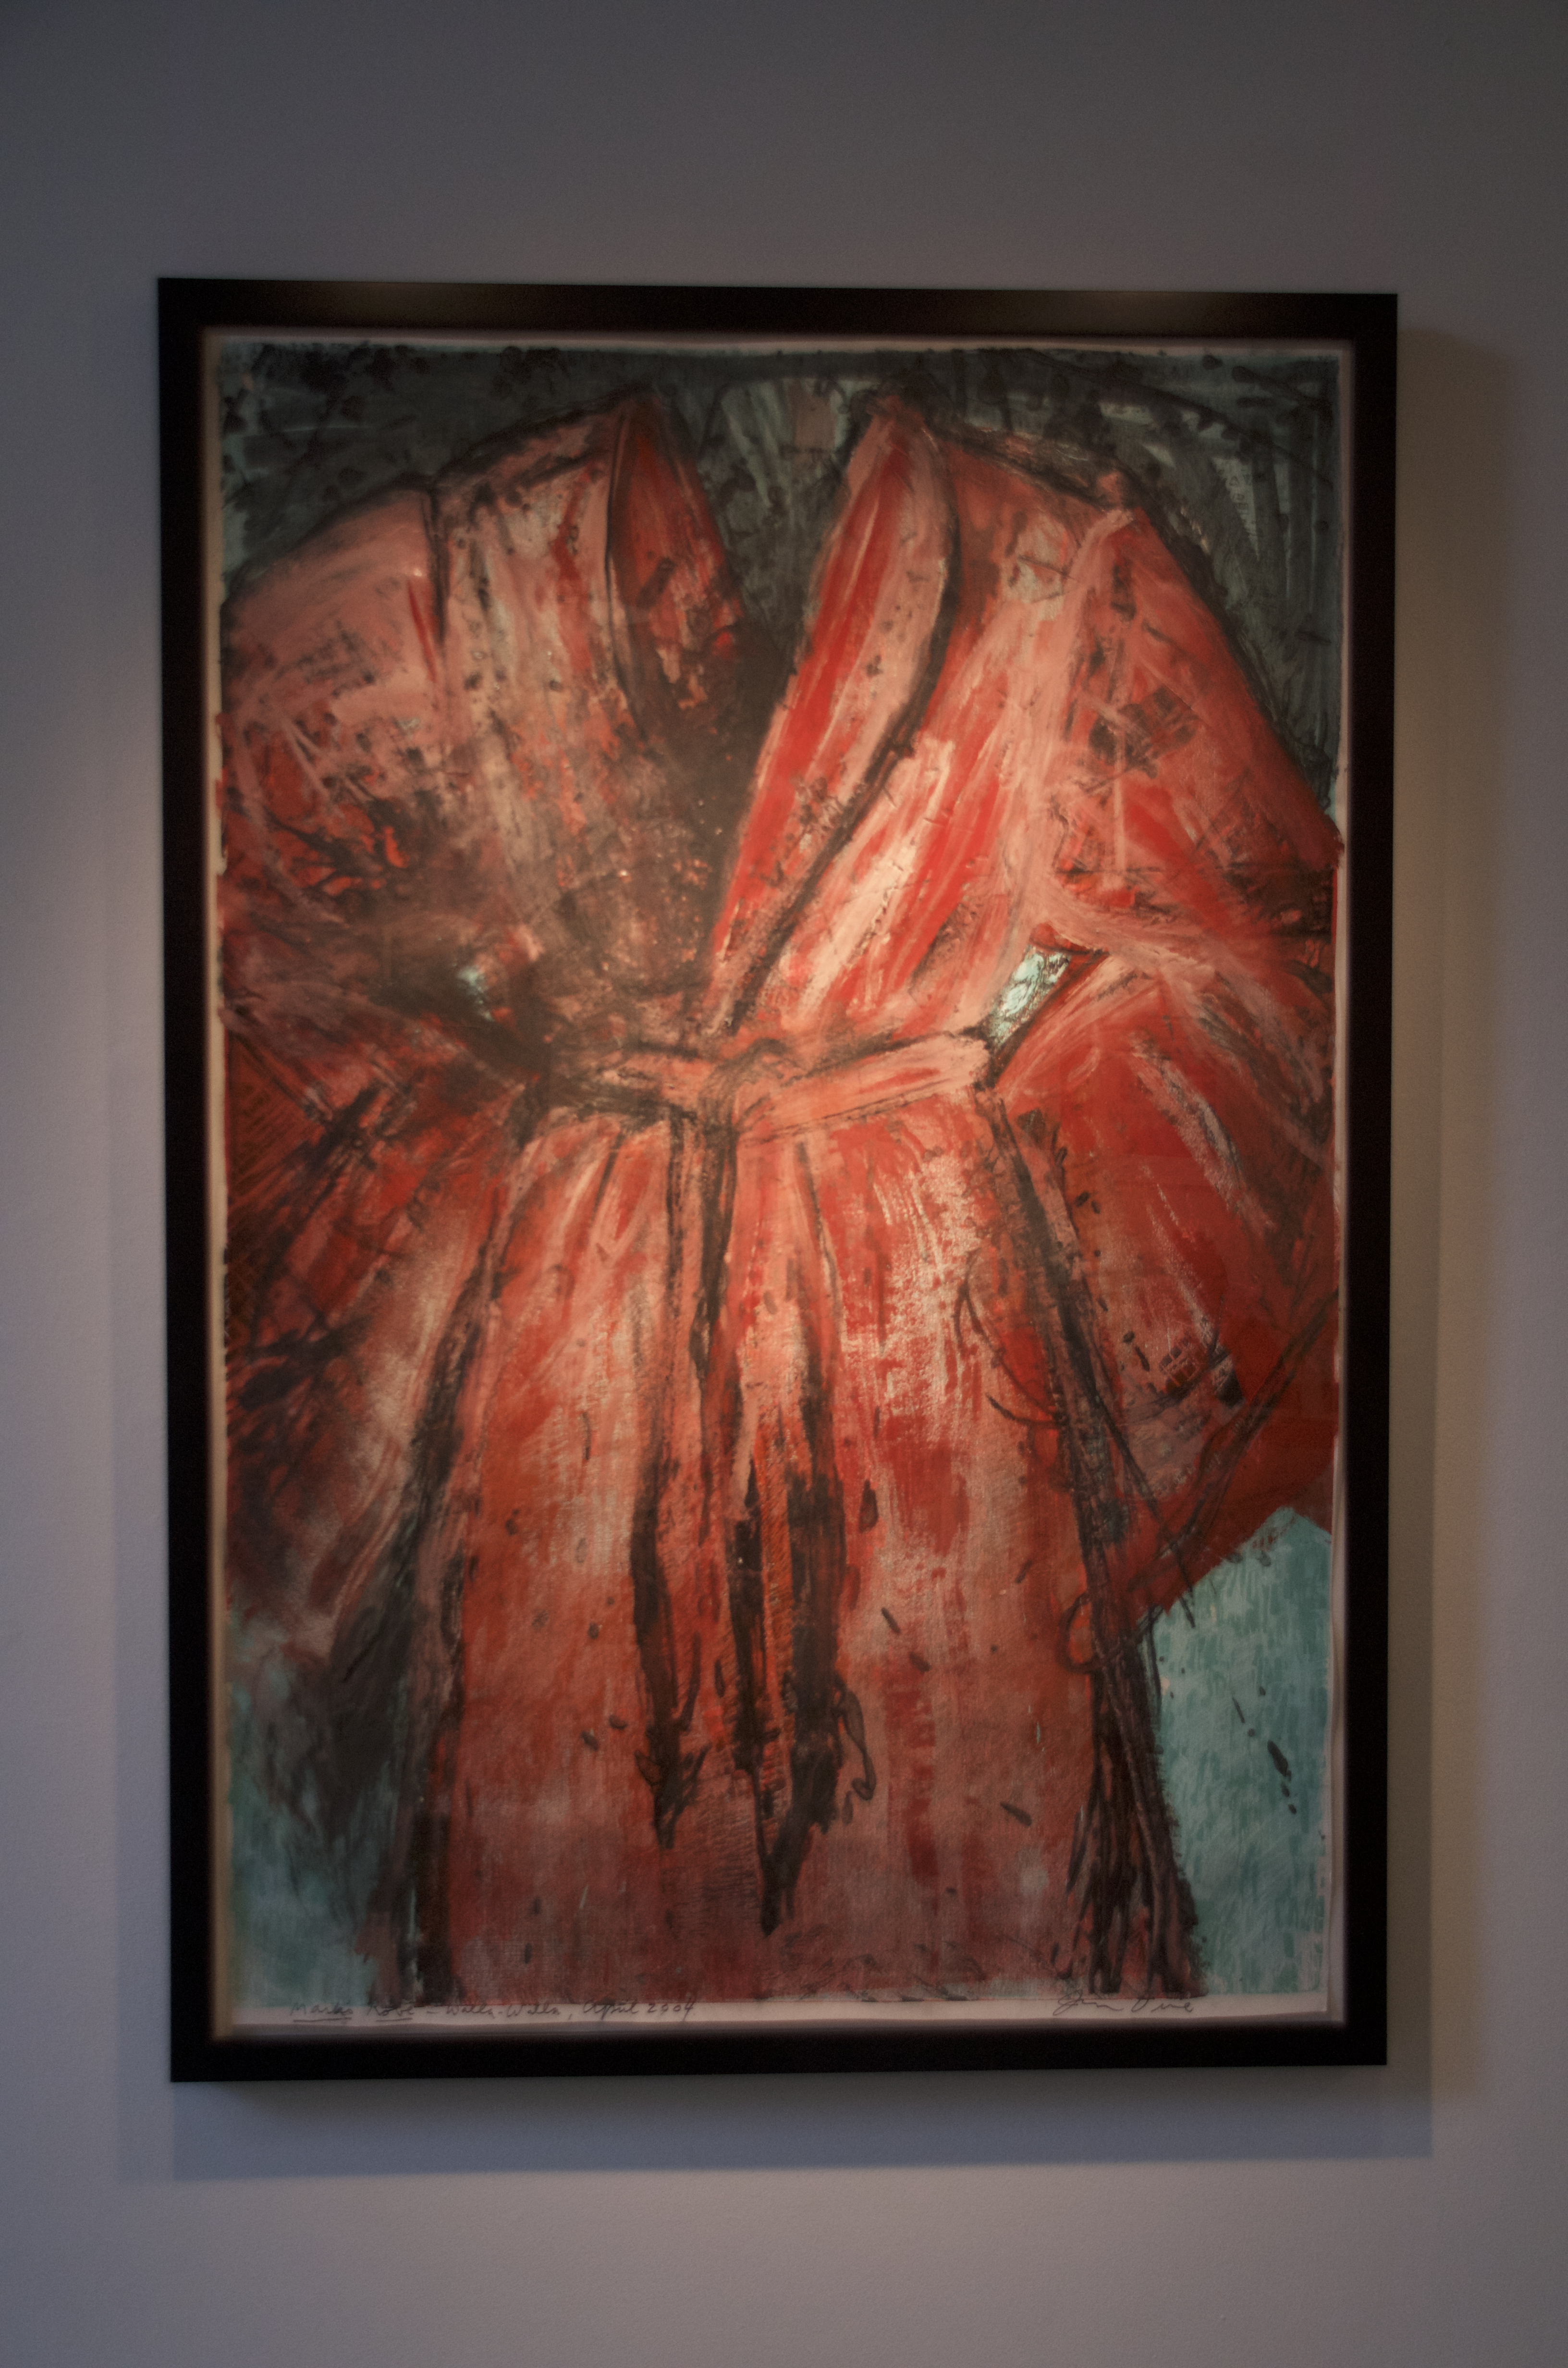 "Mark's Robe" (2003) is a hand-painted 36" x 72" print.